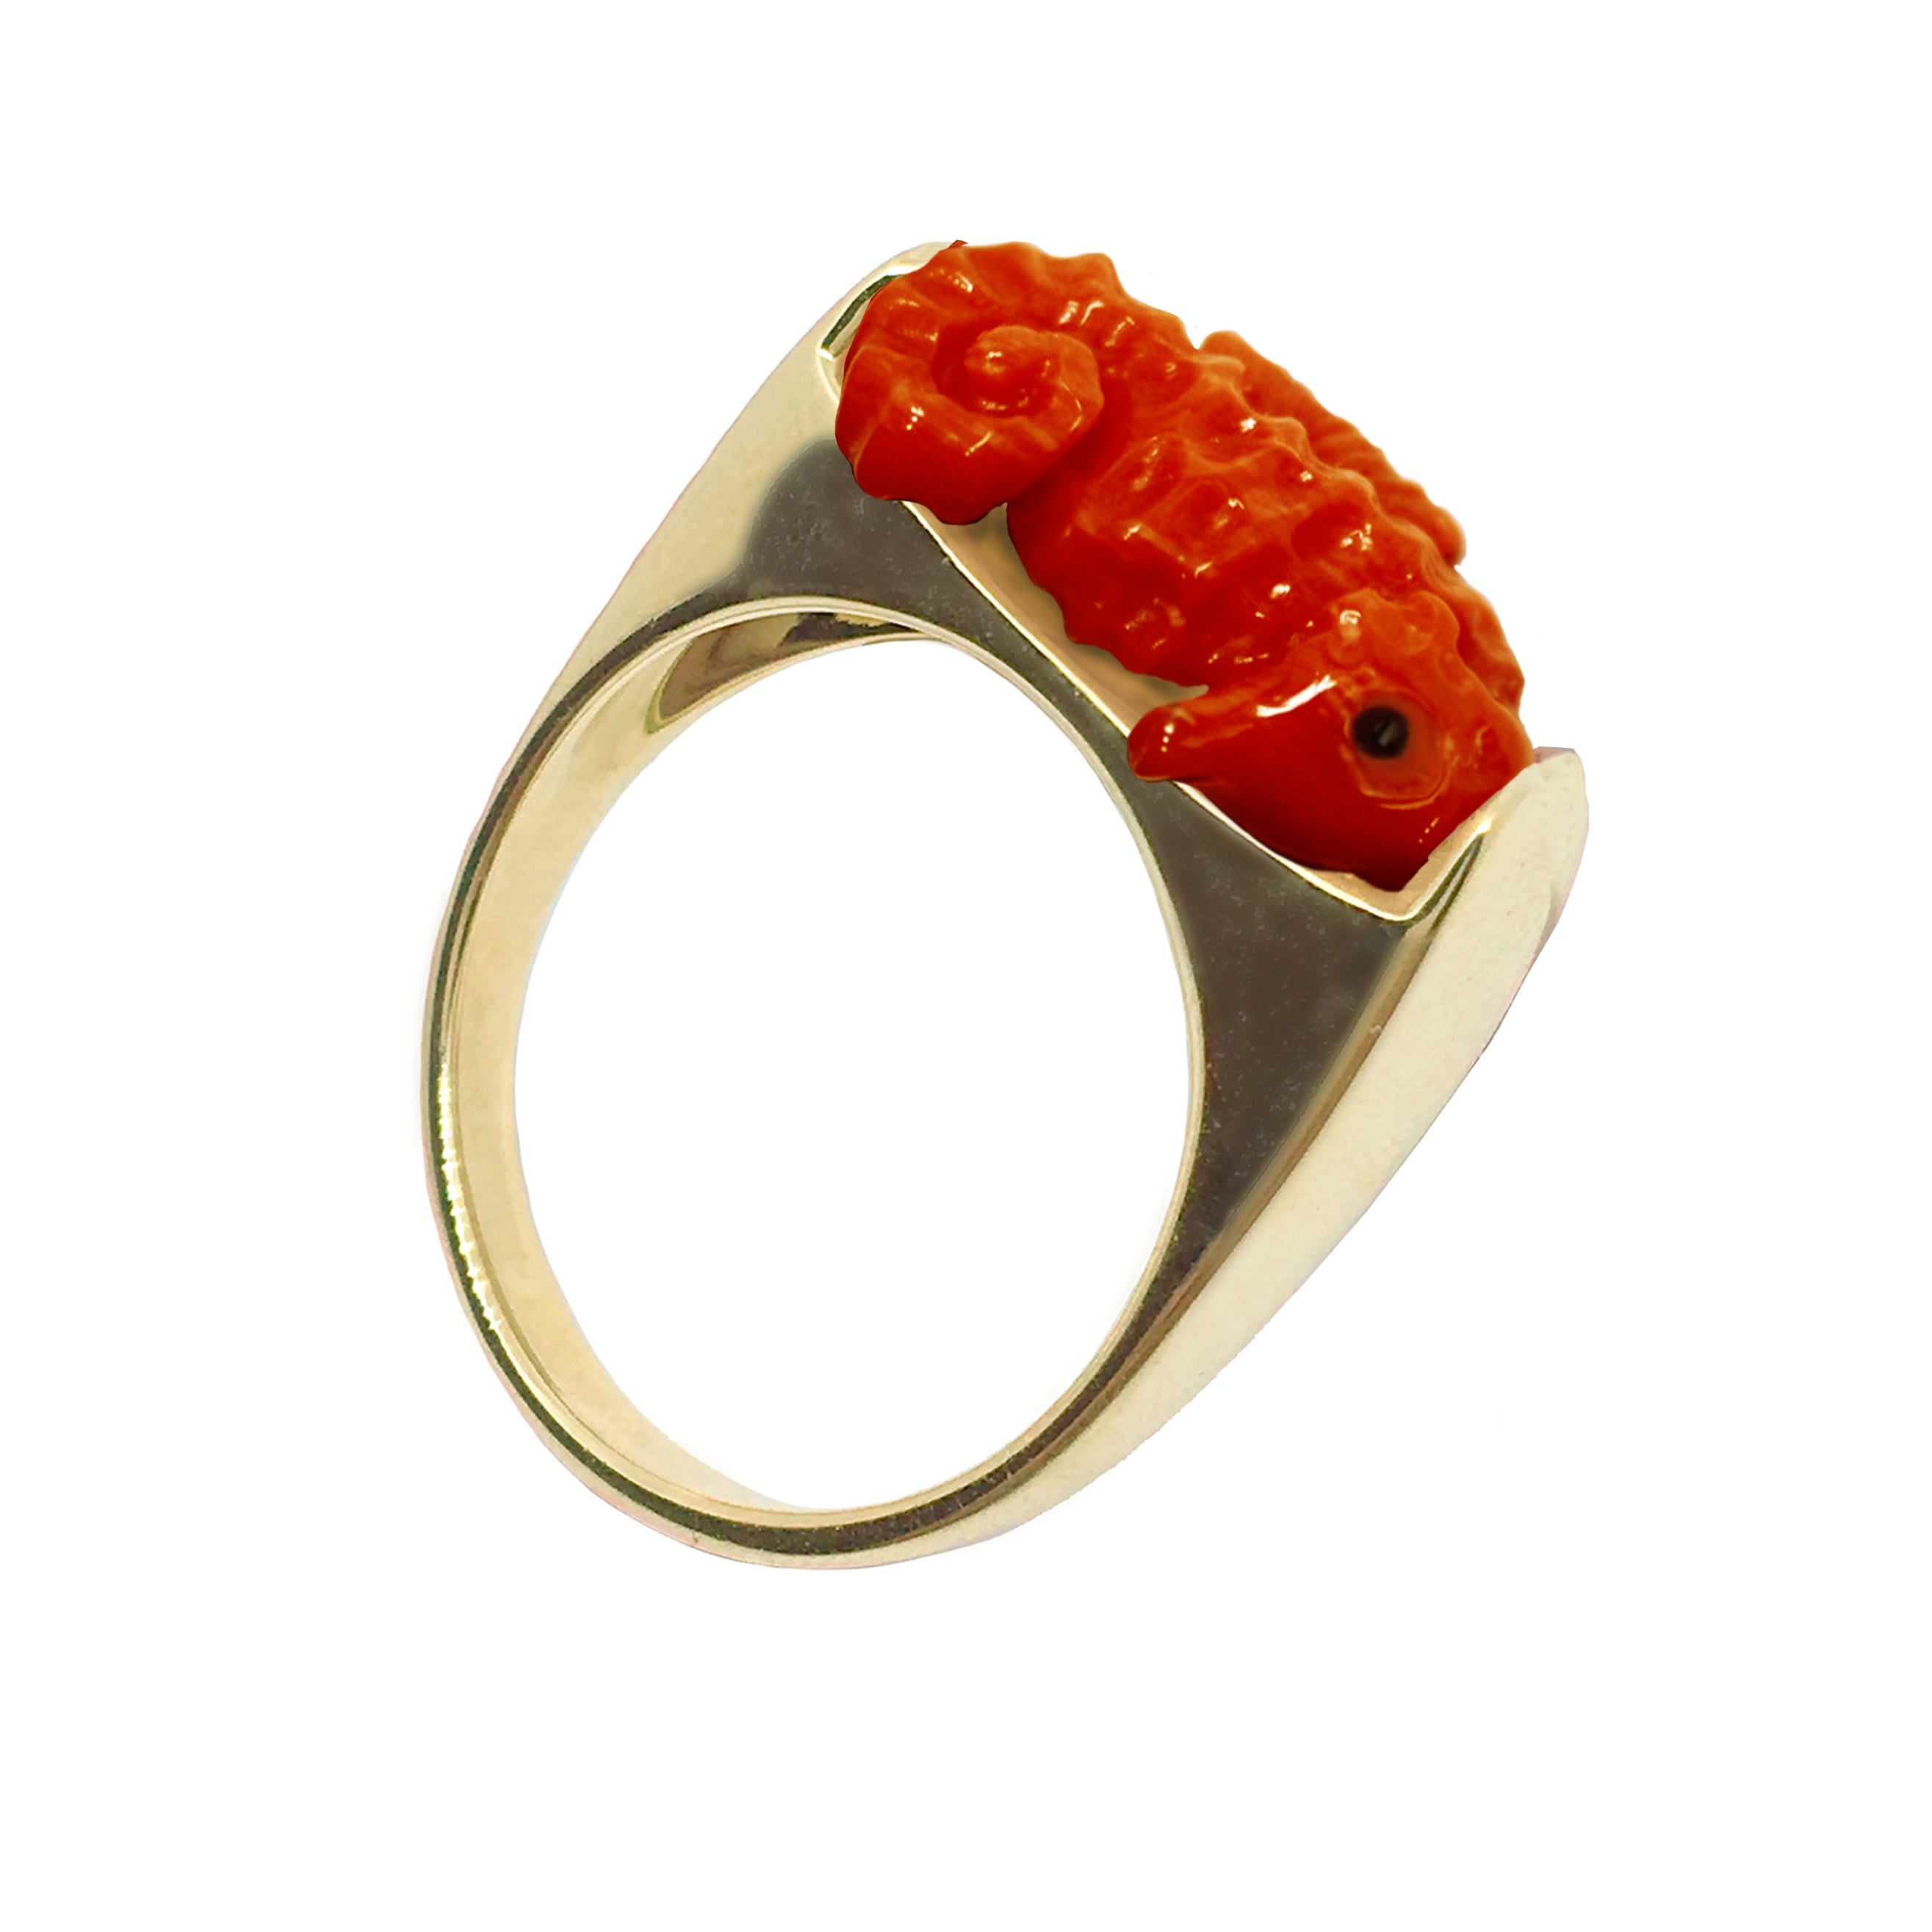 Gold ring with seahorse shaped red coral